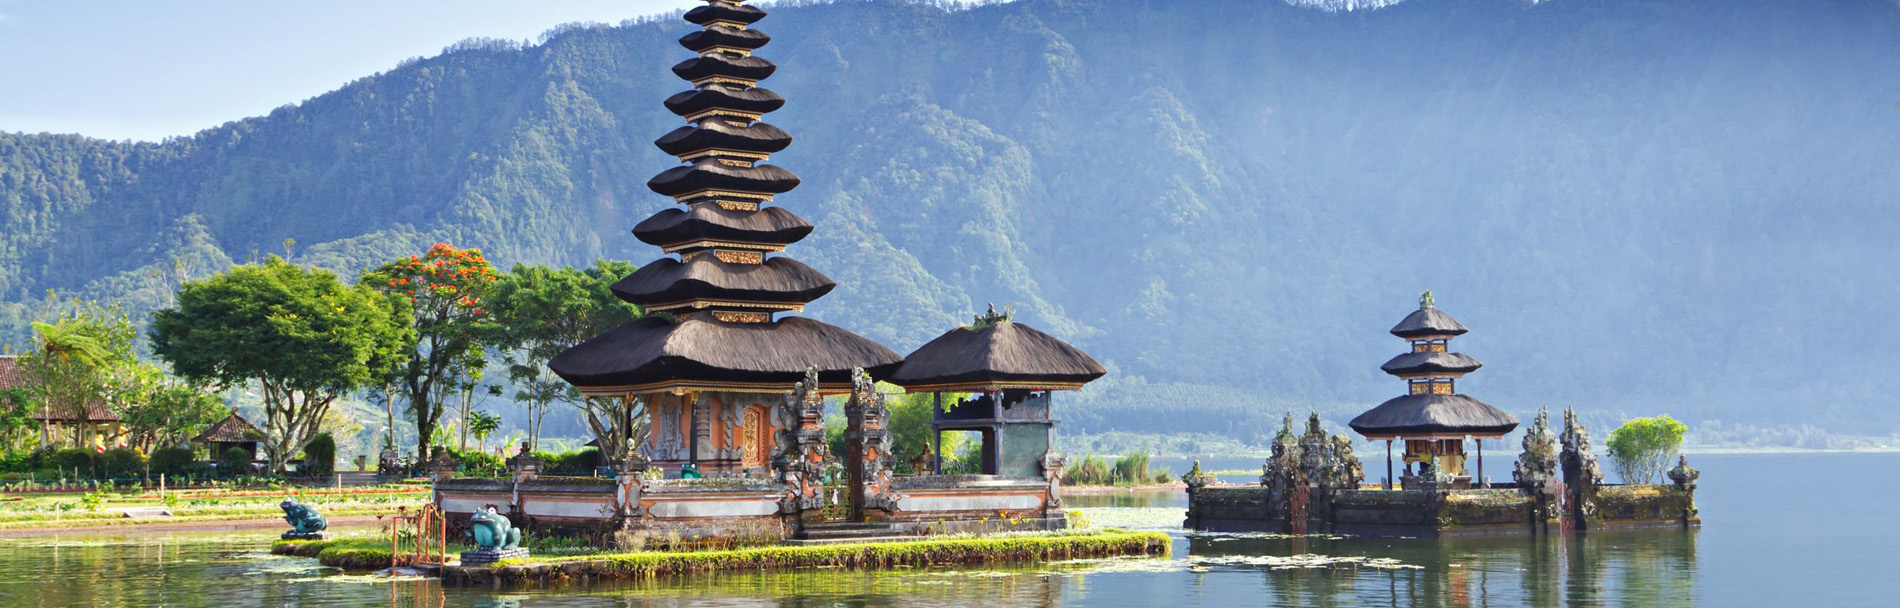 Indonesia Tour Package - 5 Nights